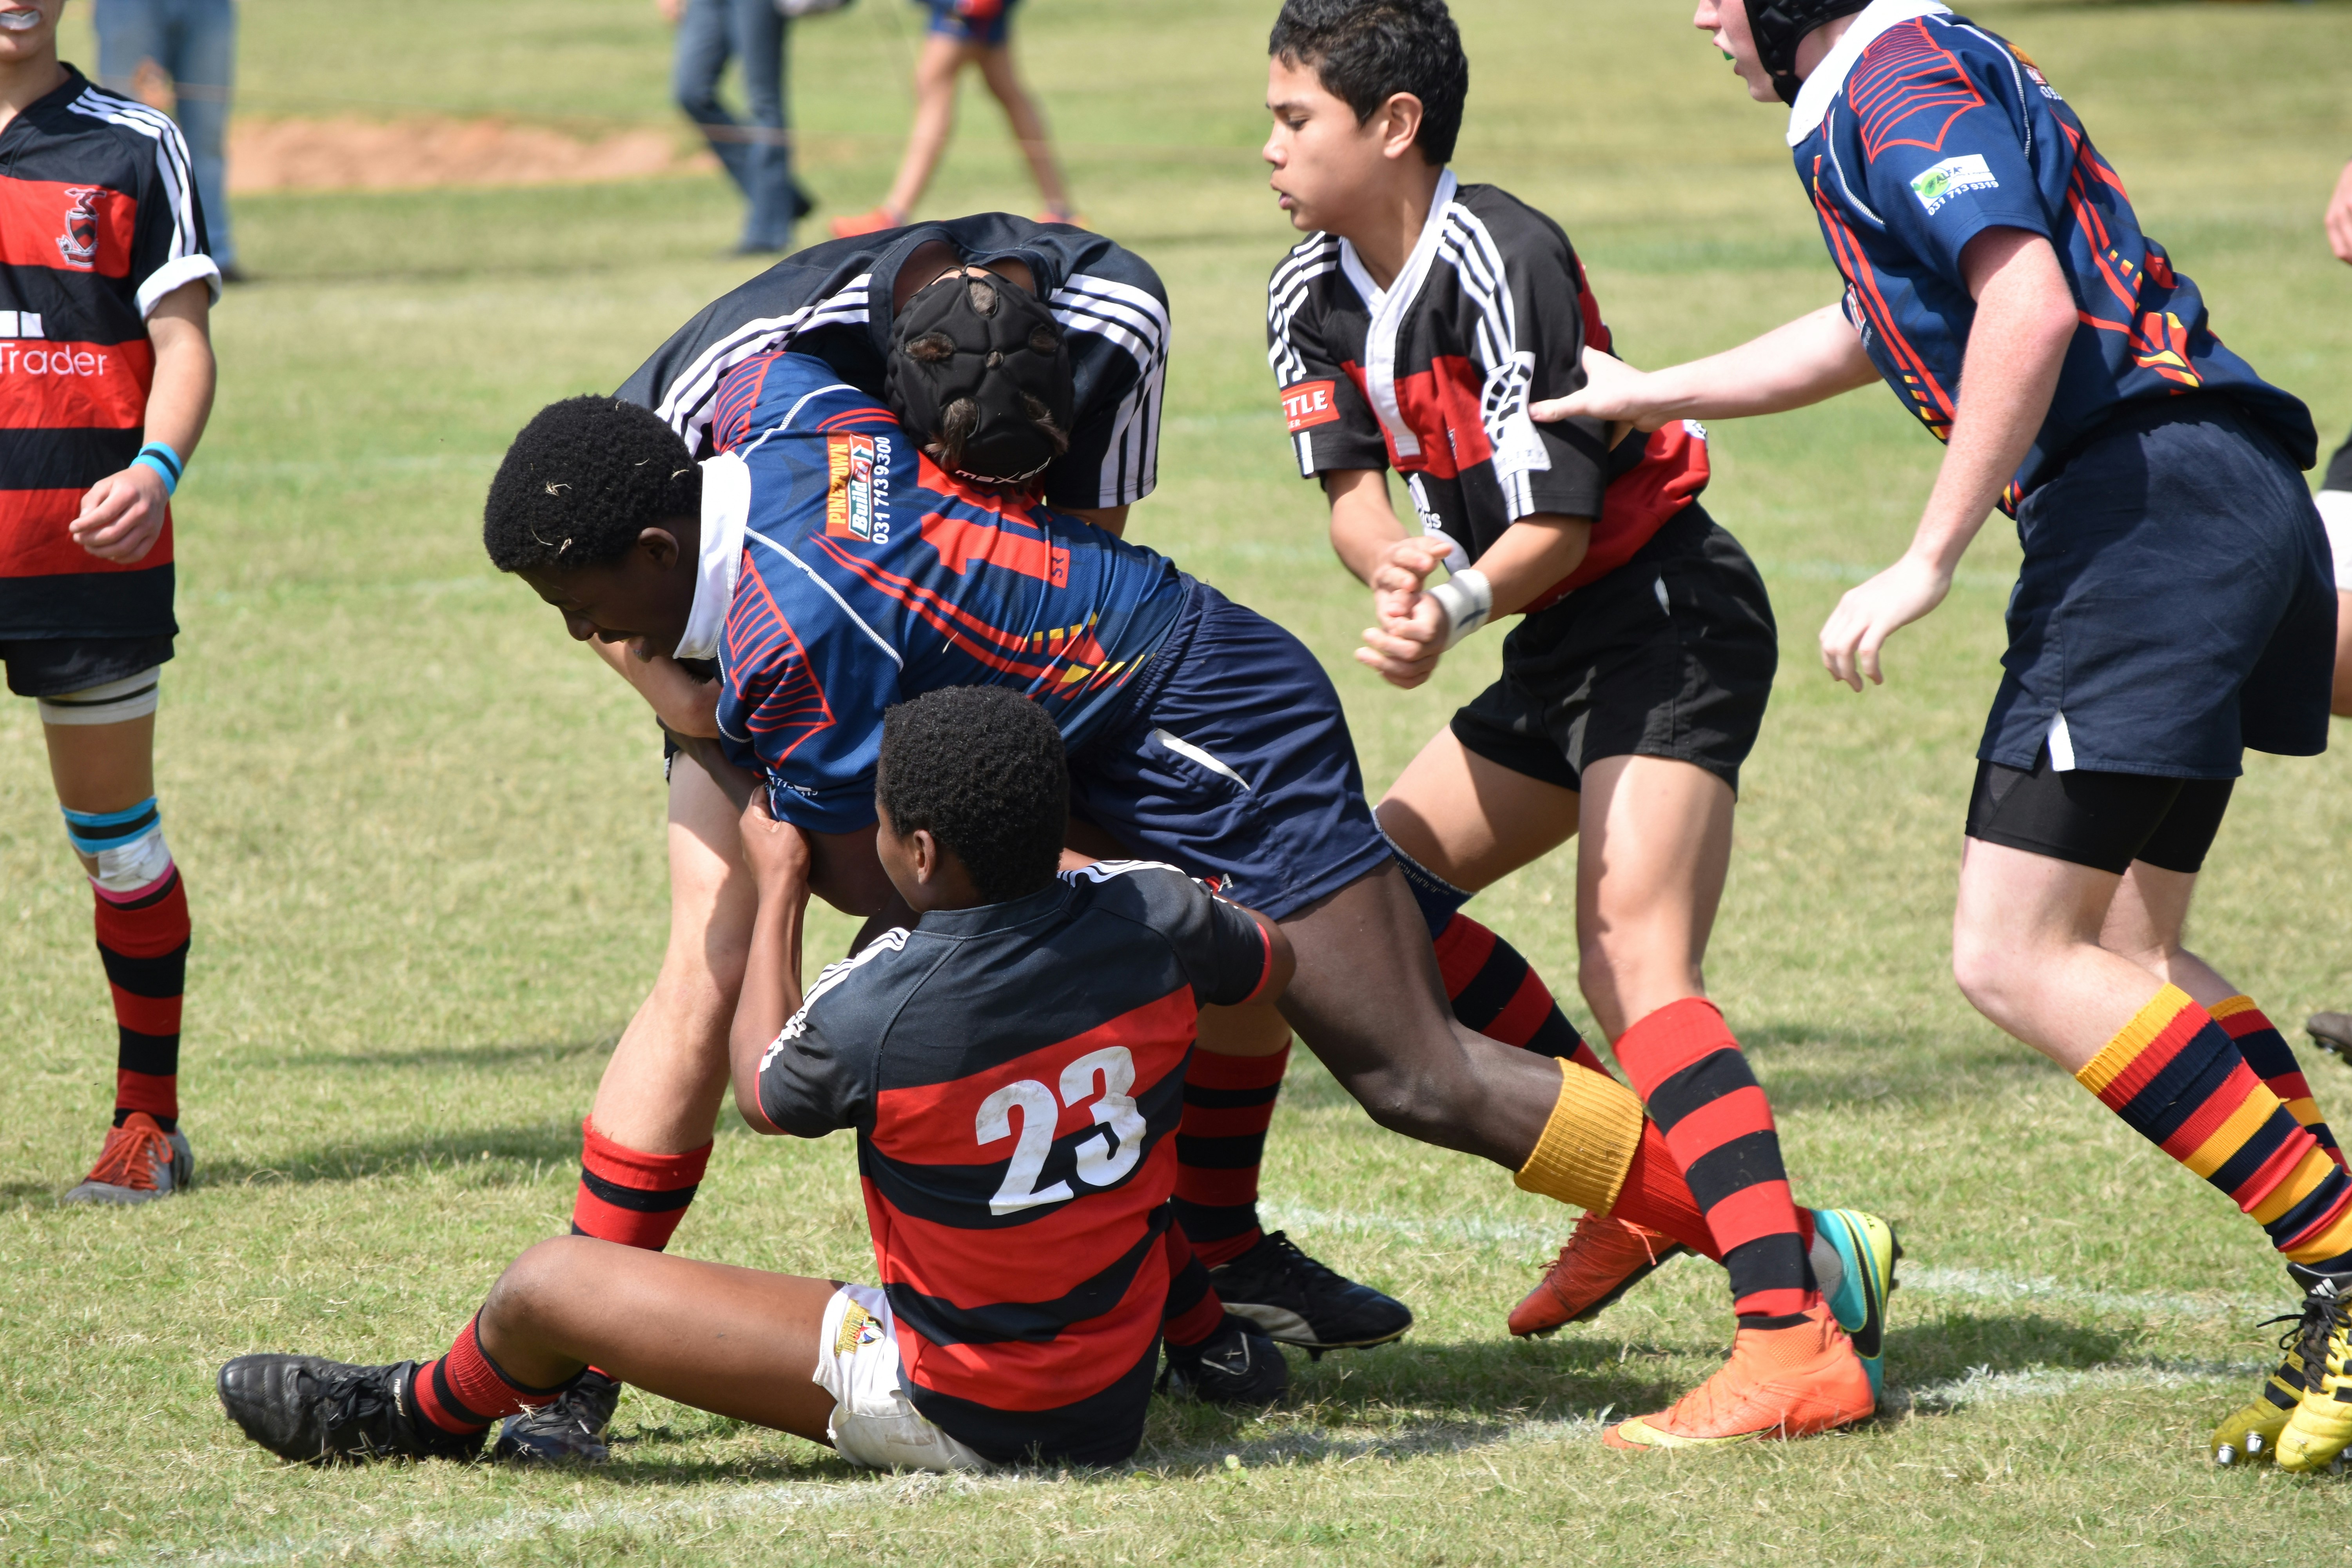 A determined youth, clutching a rugby ball pushes his way through his adversary's to gain ground, despite the other team tackling him and pulling him back.